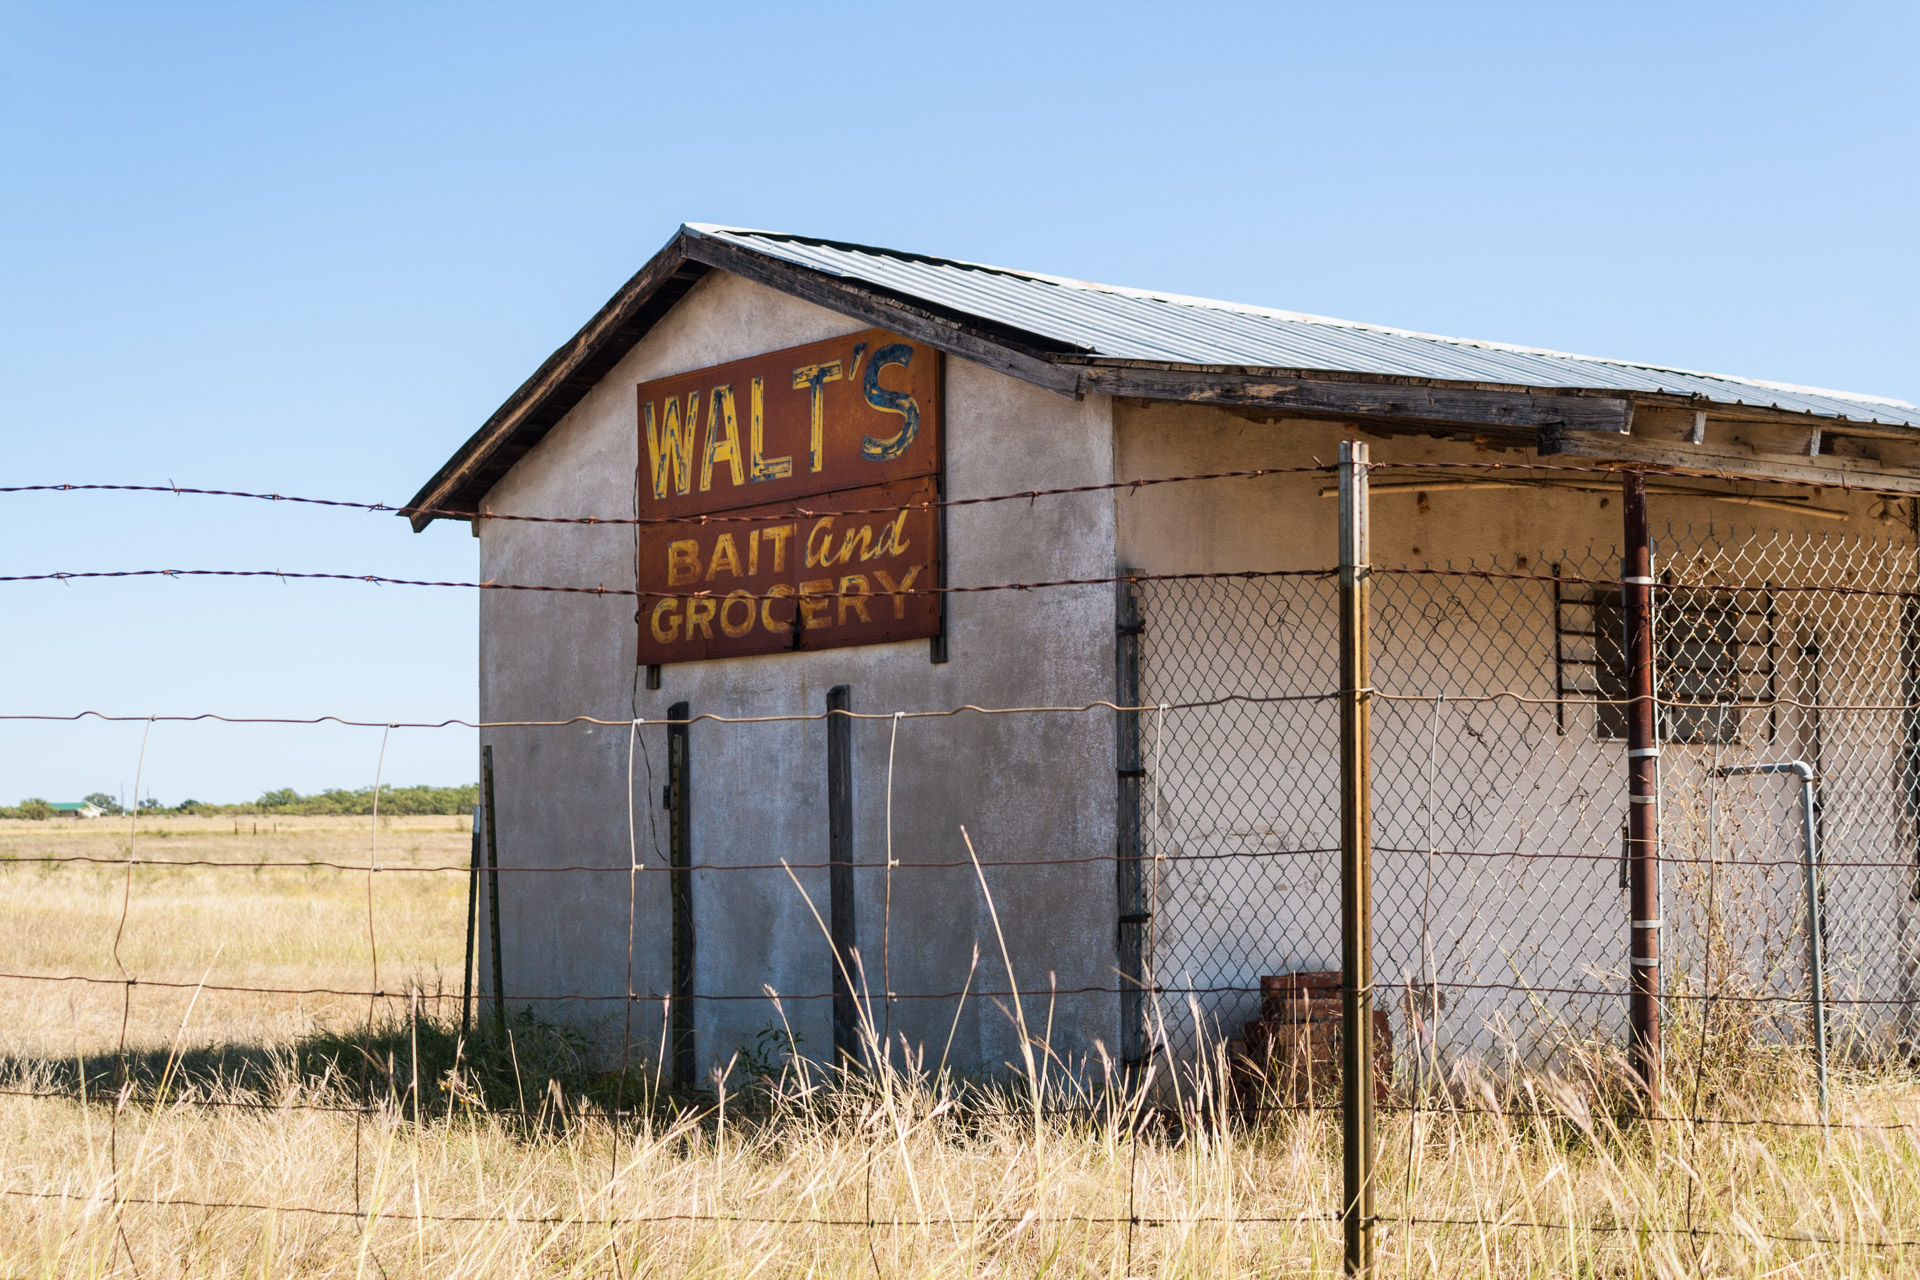 Coleman, Texas - Walt's Bait and Grocery (angle close)